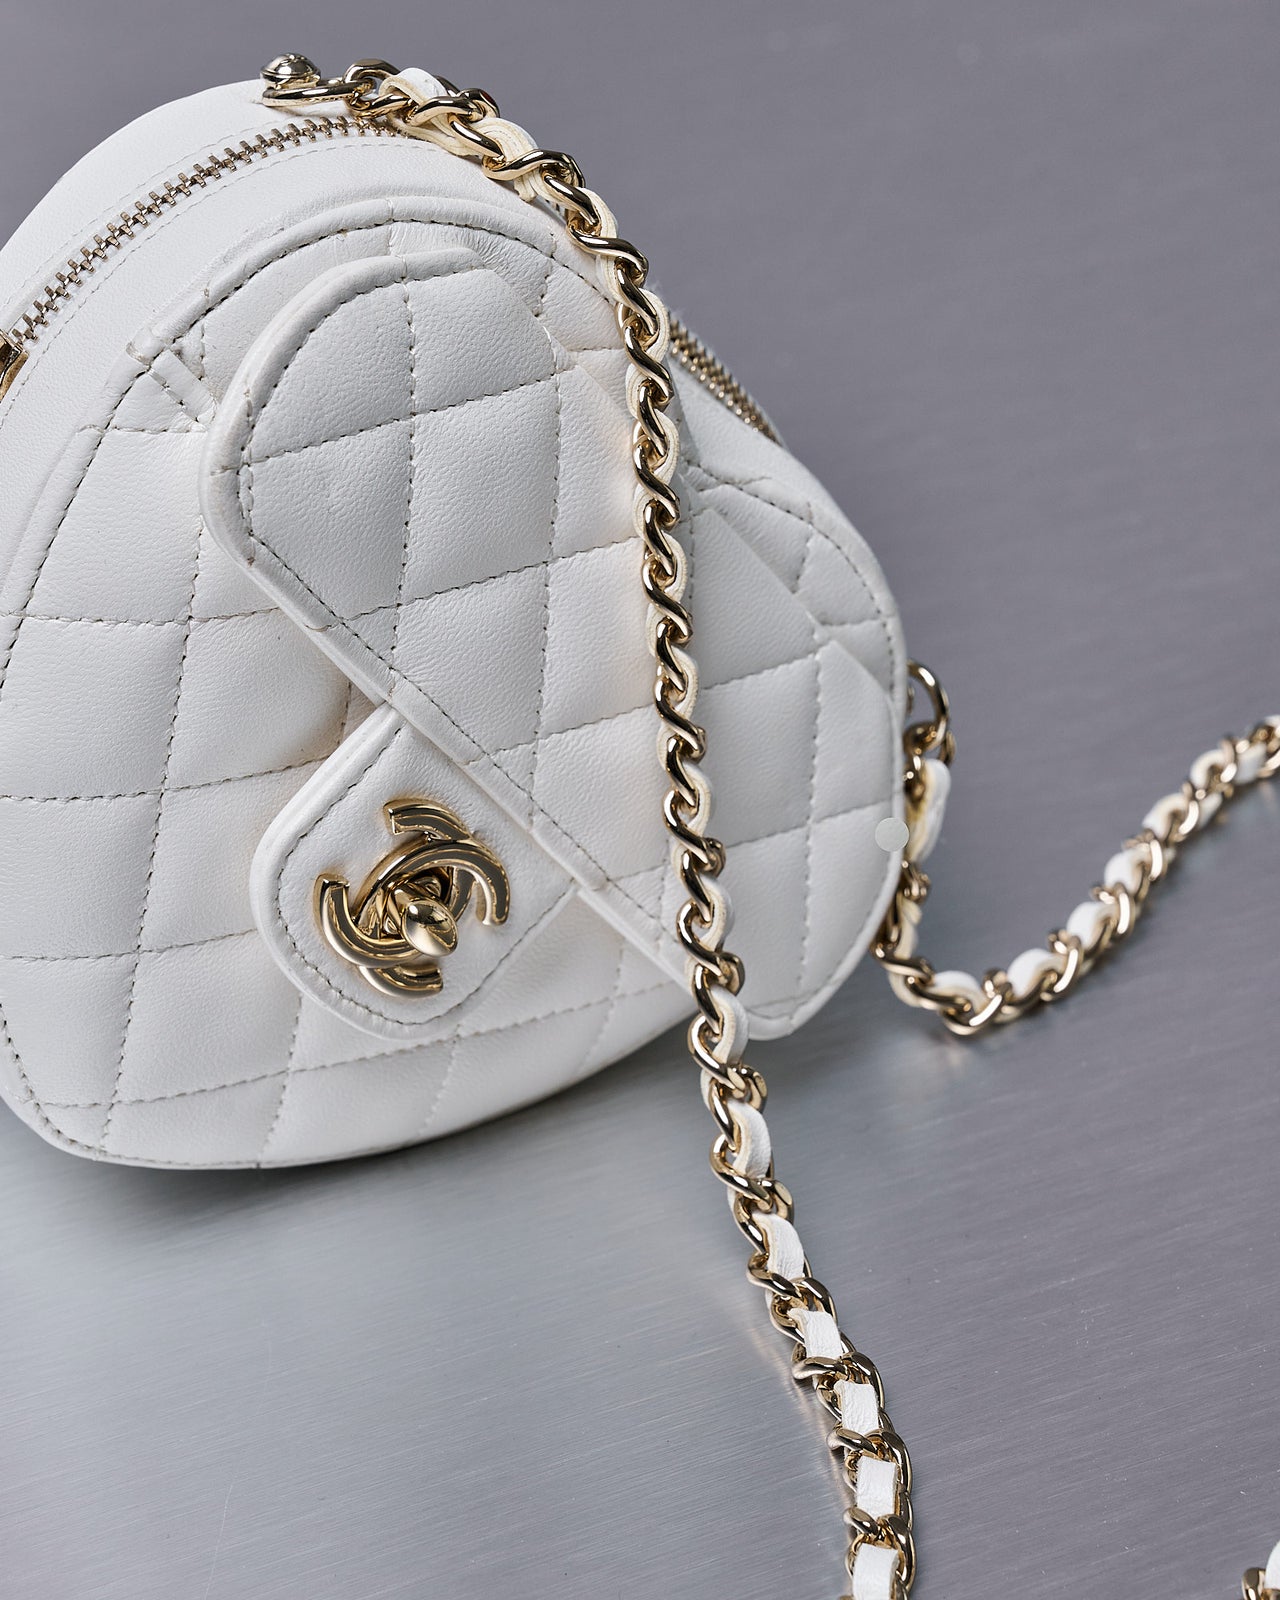 Chanel SS 2022 Small heart clutch with chain